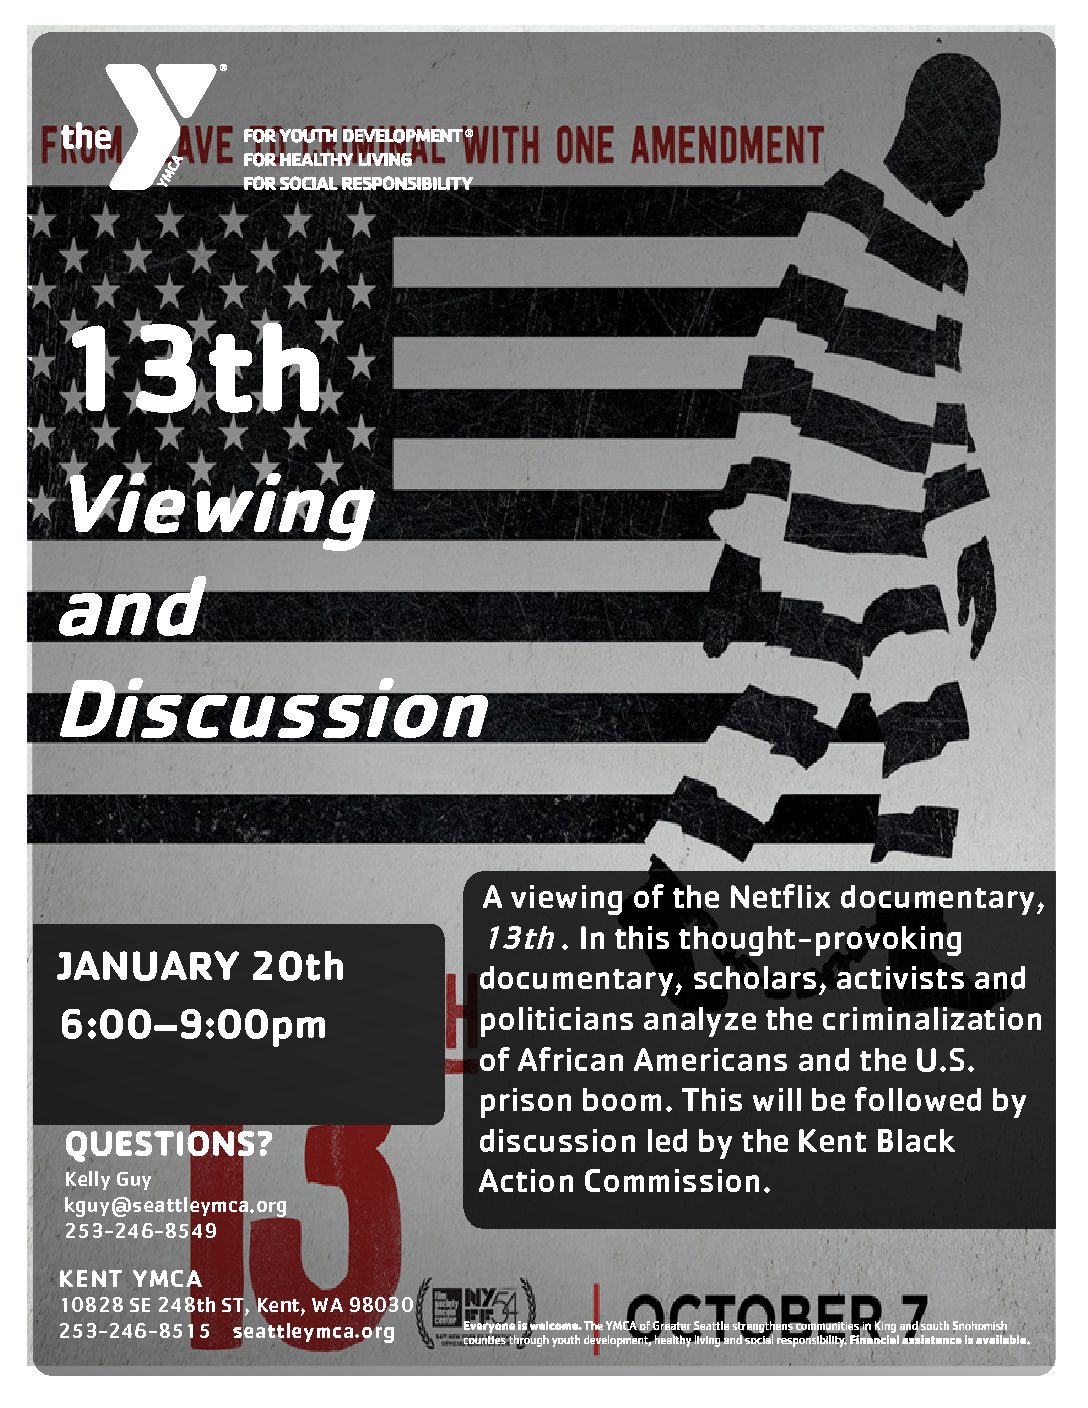 KBAC & Kent YMCA host a viewing of the documentary 13th